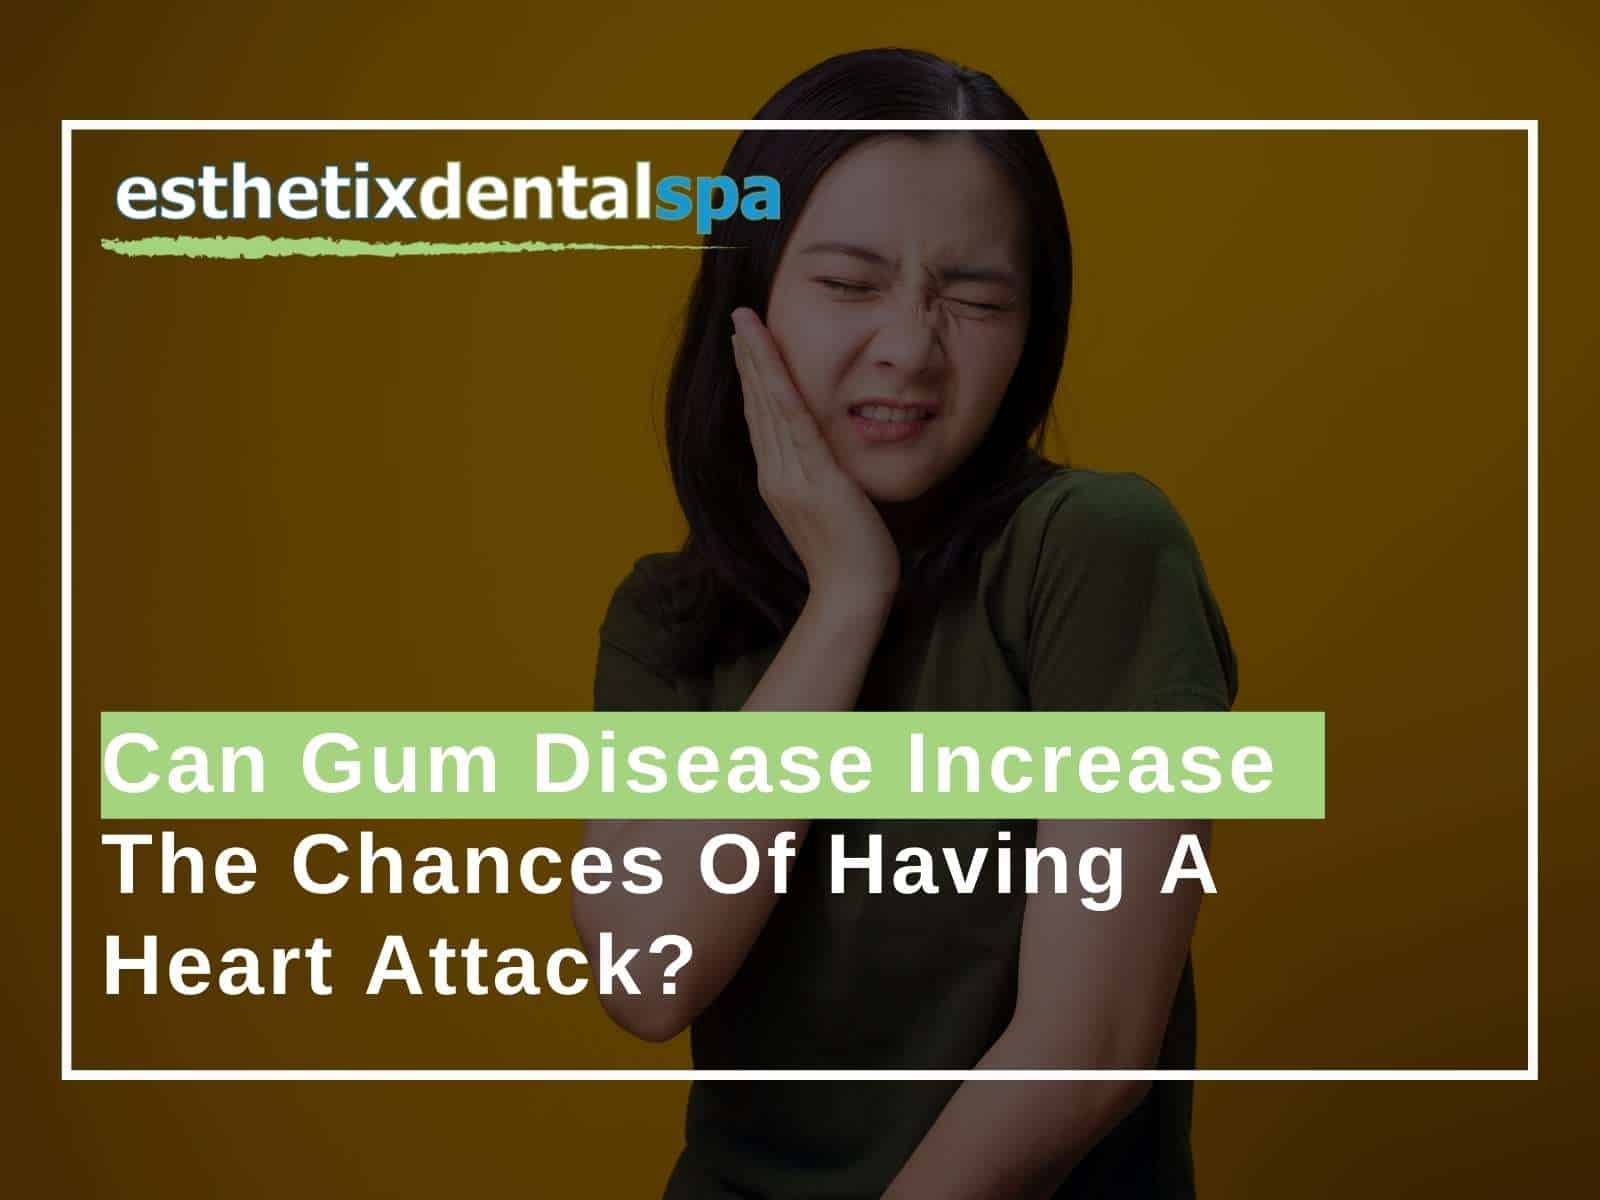 Can Gum Disease Increase The Chances Of Having A Heart Attack?